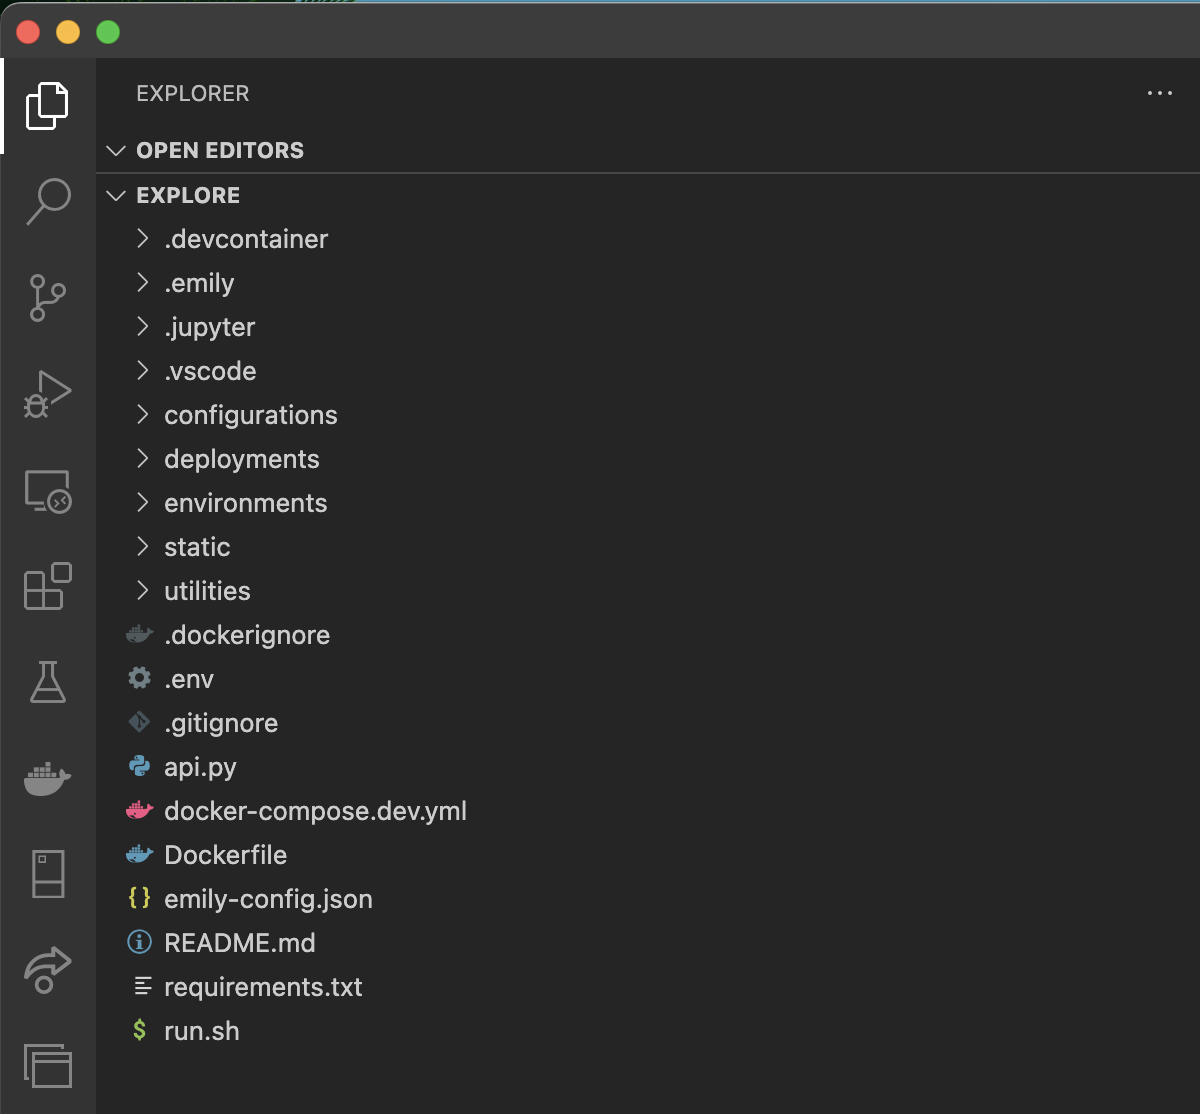 The Notebook file explorer after generating an API project with Emily